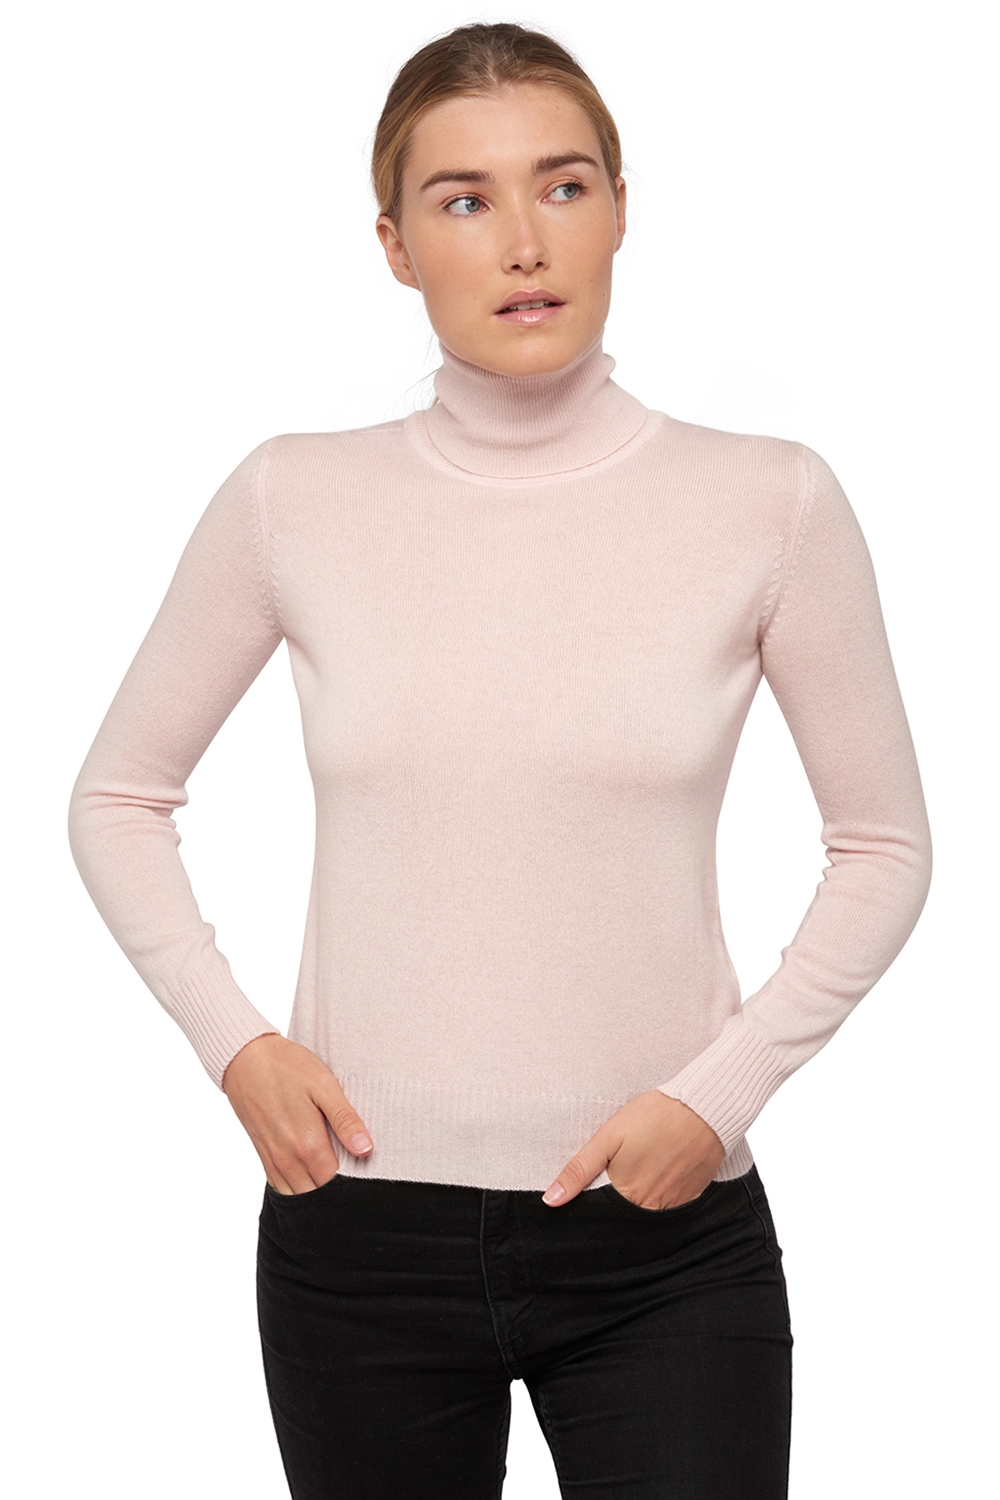 Cachemire pull femme col roule lili rose pale s